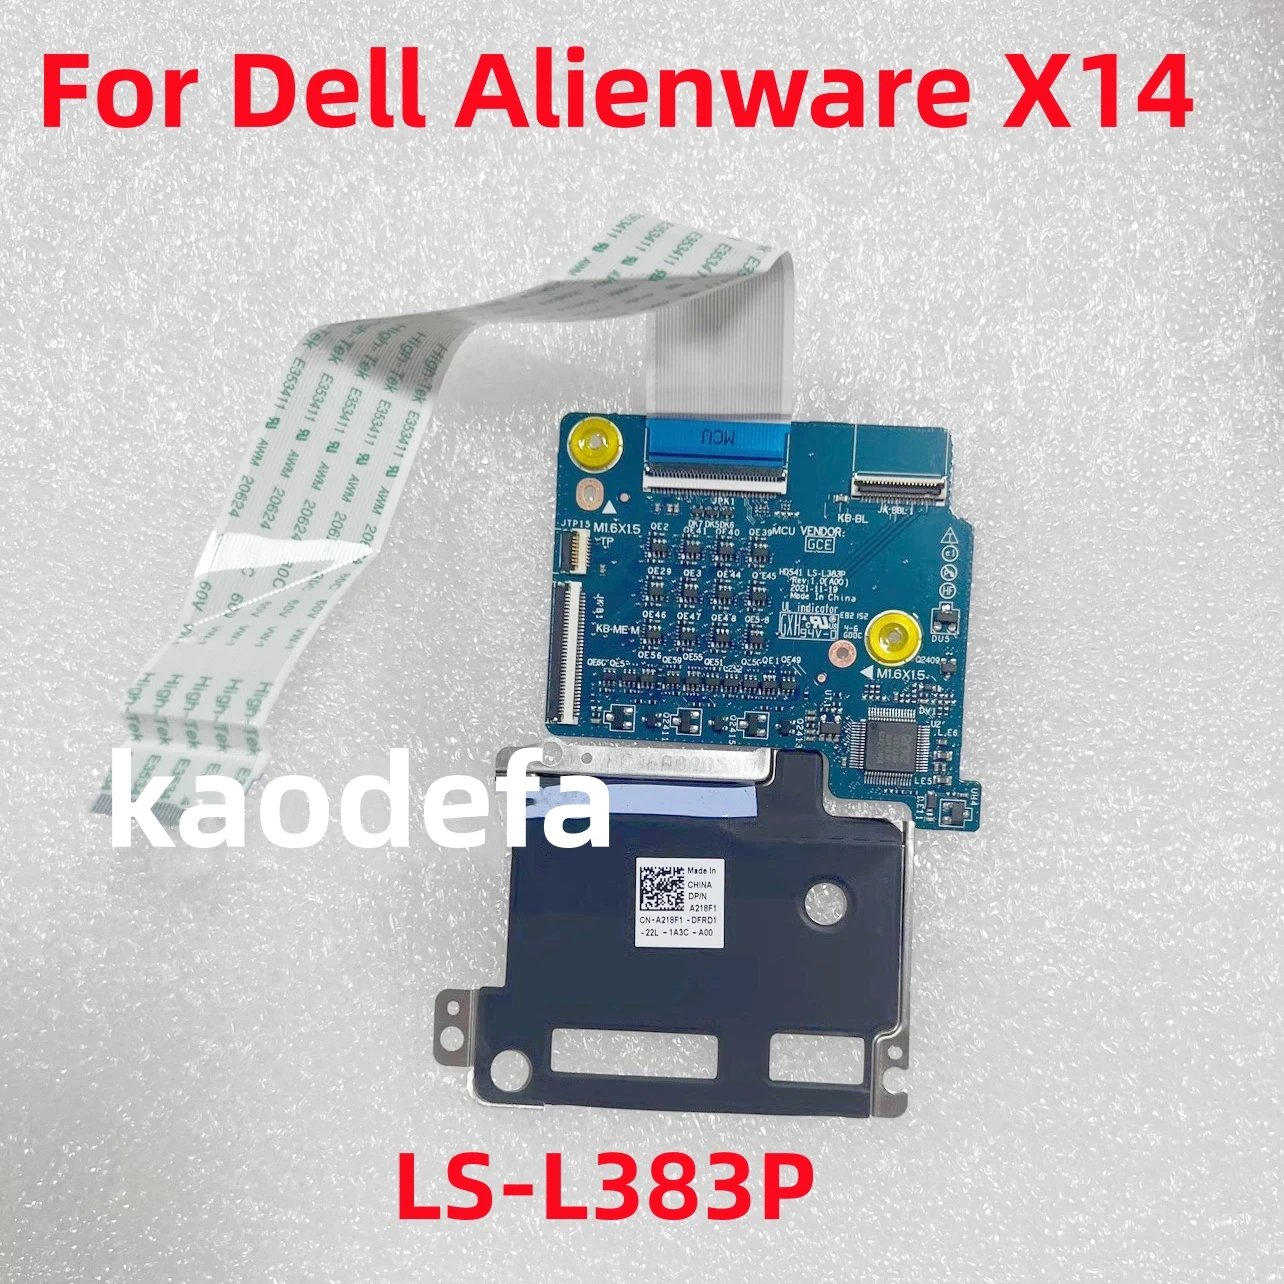 

LS-L383P For Dell Alienware X14 Laptop Keyboard Junction Connect Board CN-09PGVW 09PGVW 9PGVW 100% Test OK